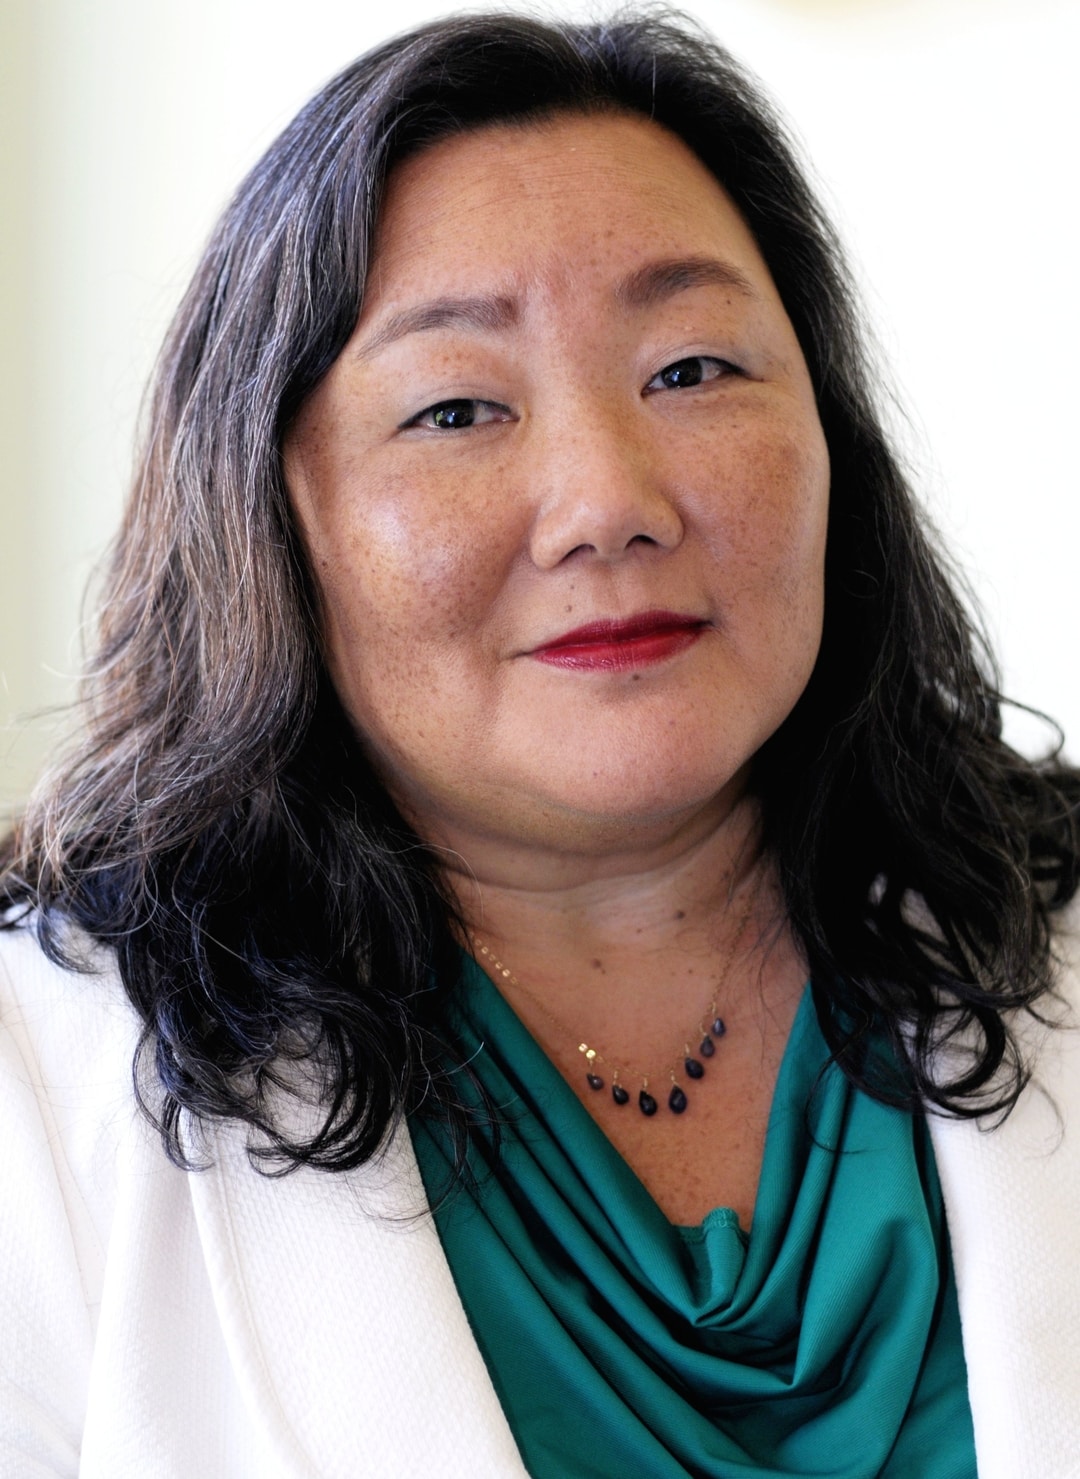 National Girls Initiative: Jeannette Pai-Espinosa (headshot), president of National Crittenton, woman with long dark hair, necklace, white jacket, green top